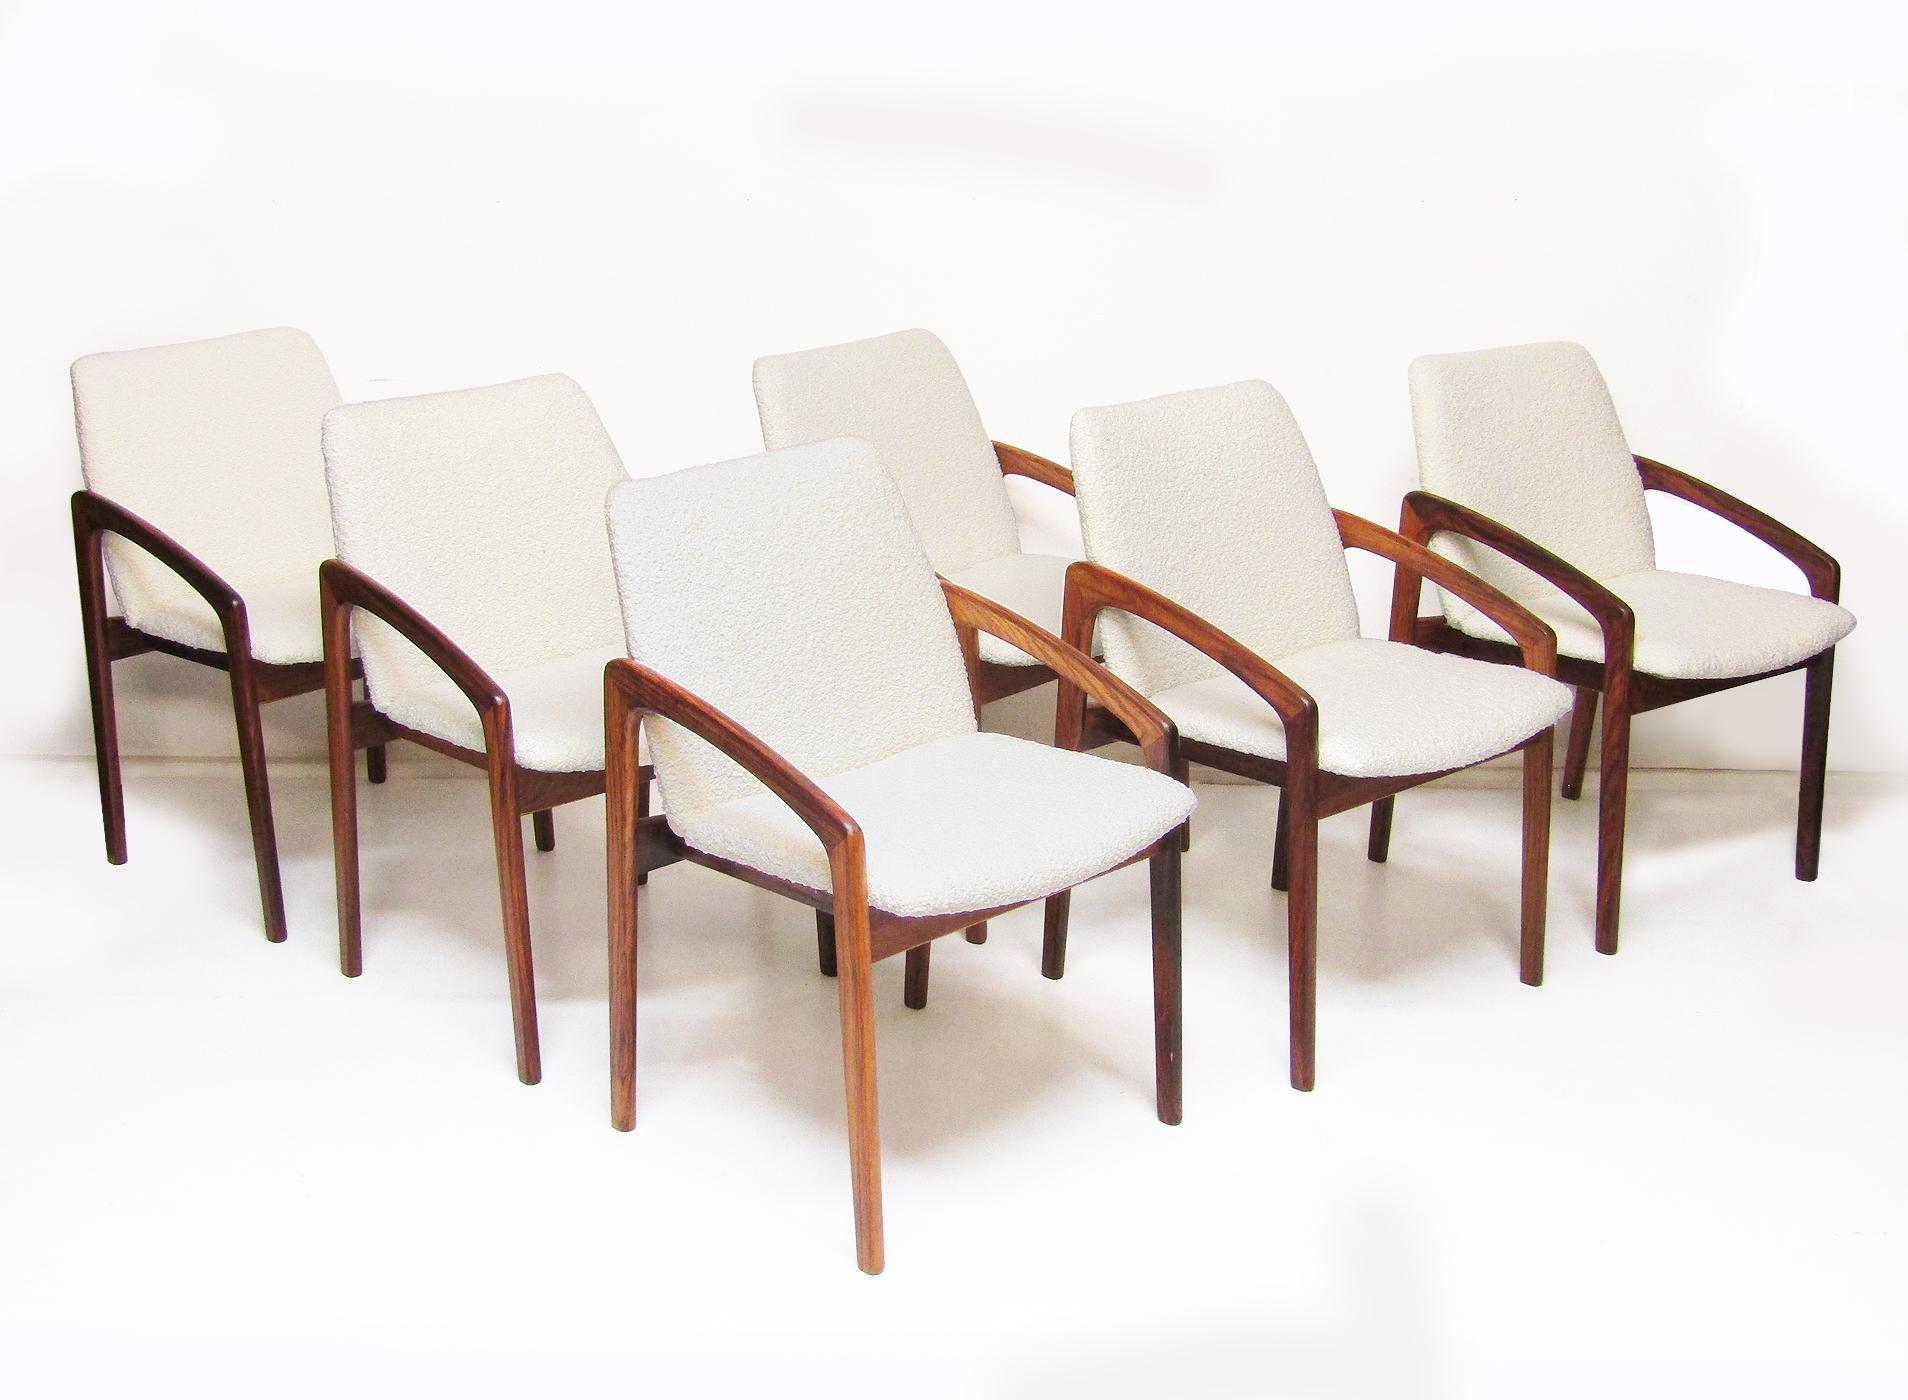 A set of six 1960s Danish rosewood dining chairs by Henning Kjaernulf for Korup Stolefabrik.

They have been reupholstered in a soft, luxurious ivory bouclé fabric.

The rosewood version of this chair is very rare. The beautifully grained wood